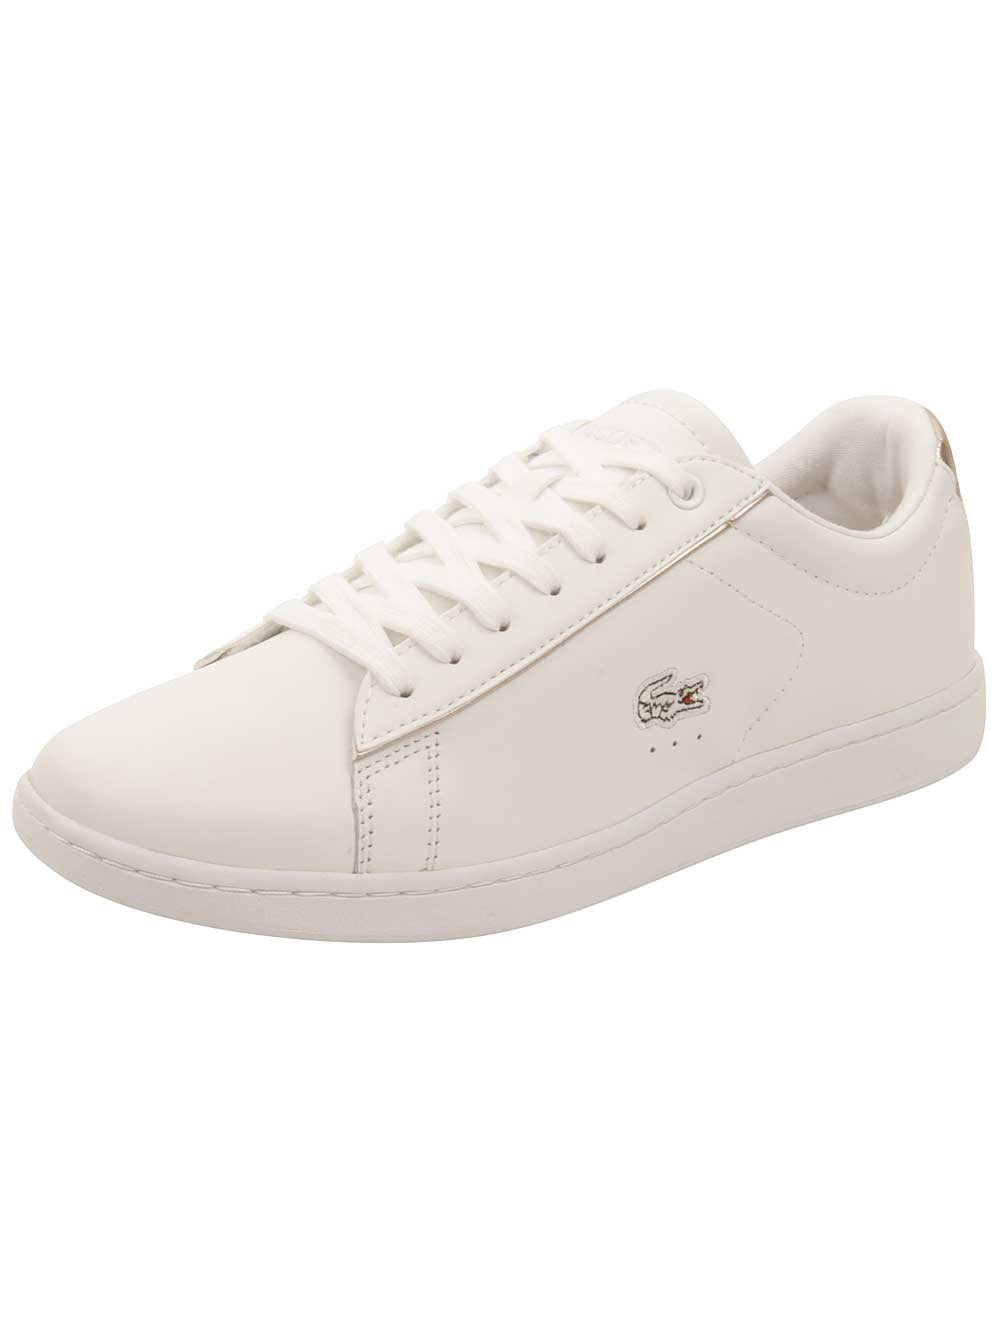 Lacoste Womens Carnaby EVO 316 Sneakers 